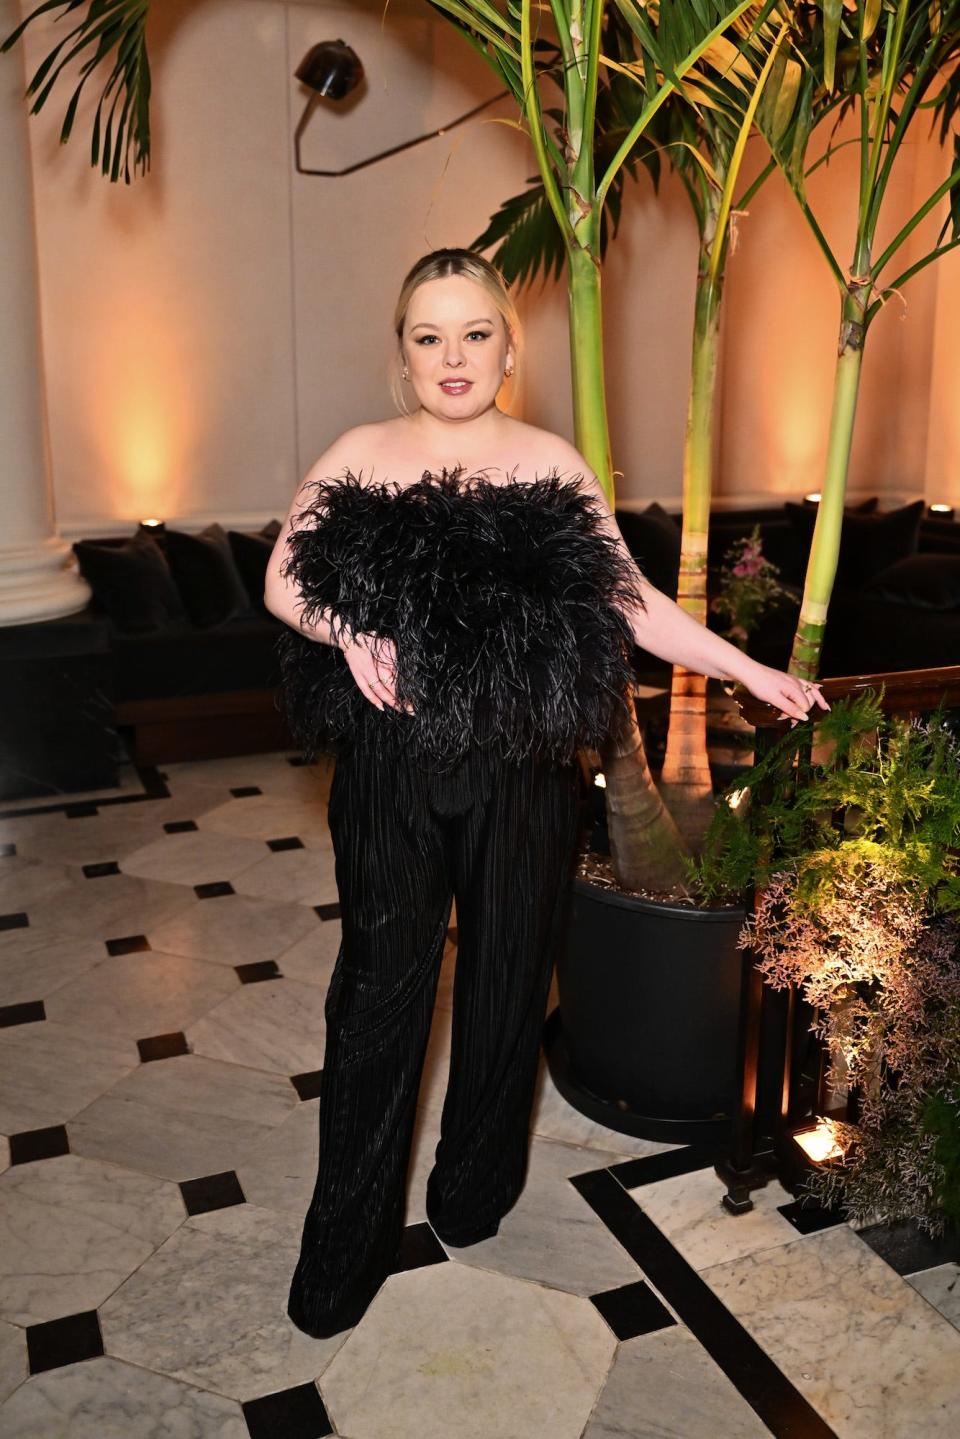 Nicola Coughlan attends a British Vogue event in London.